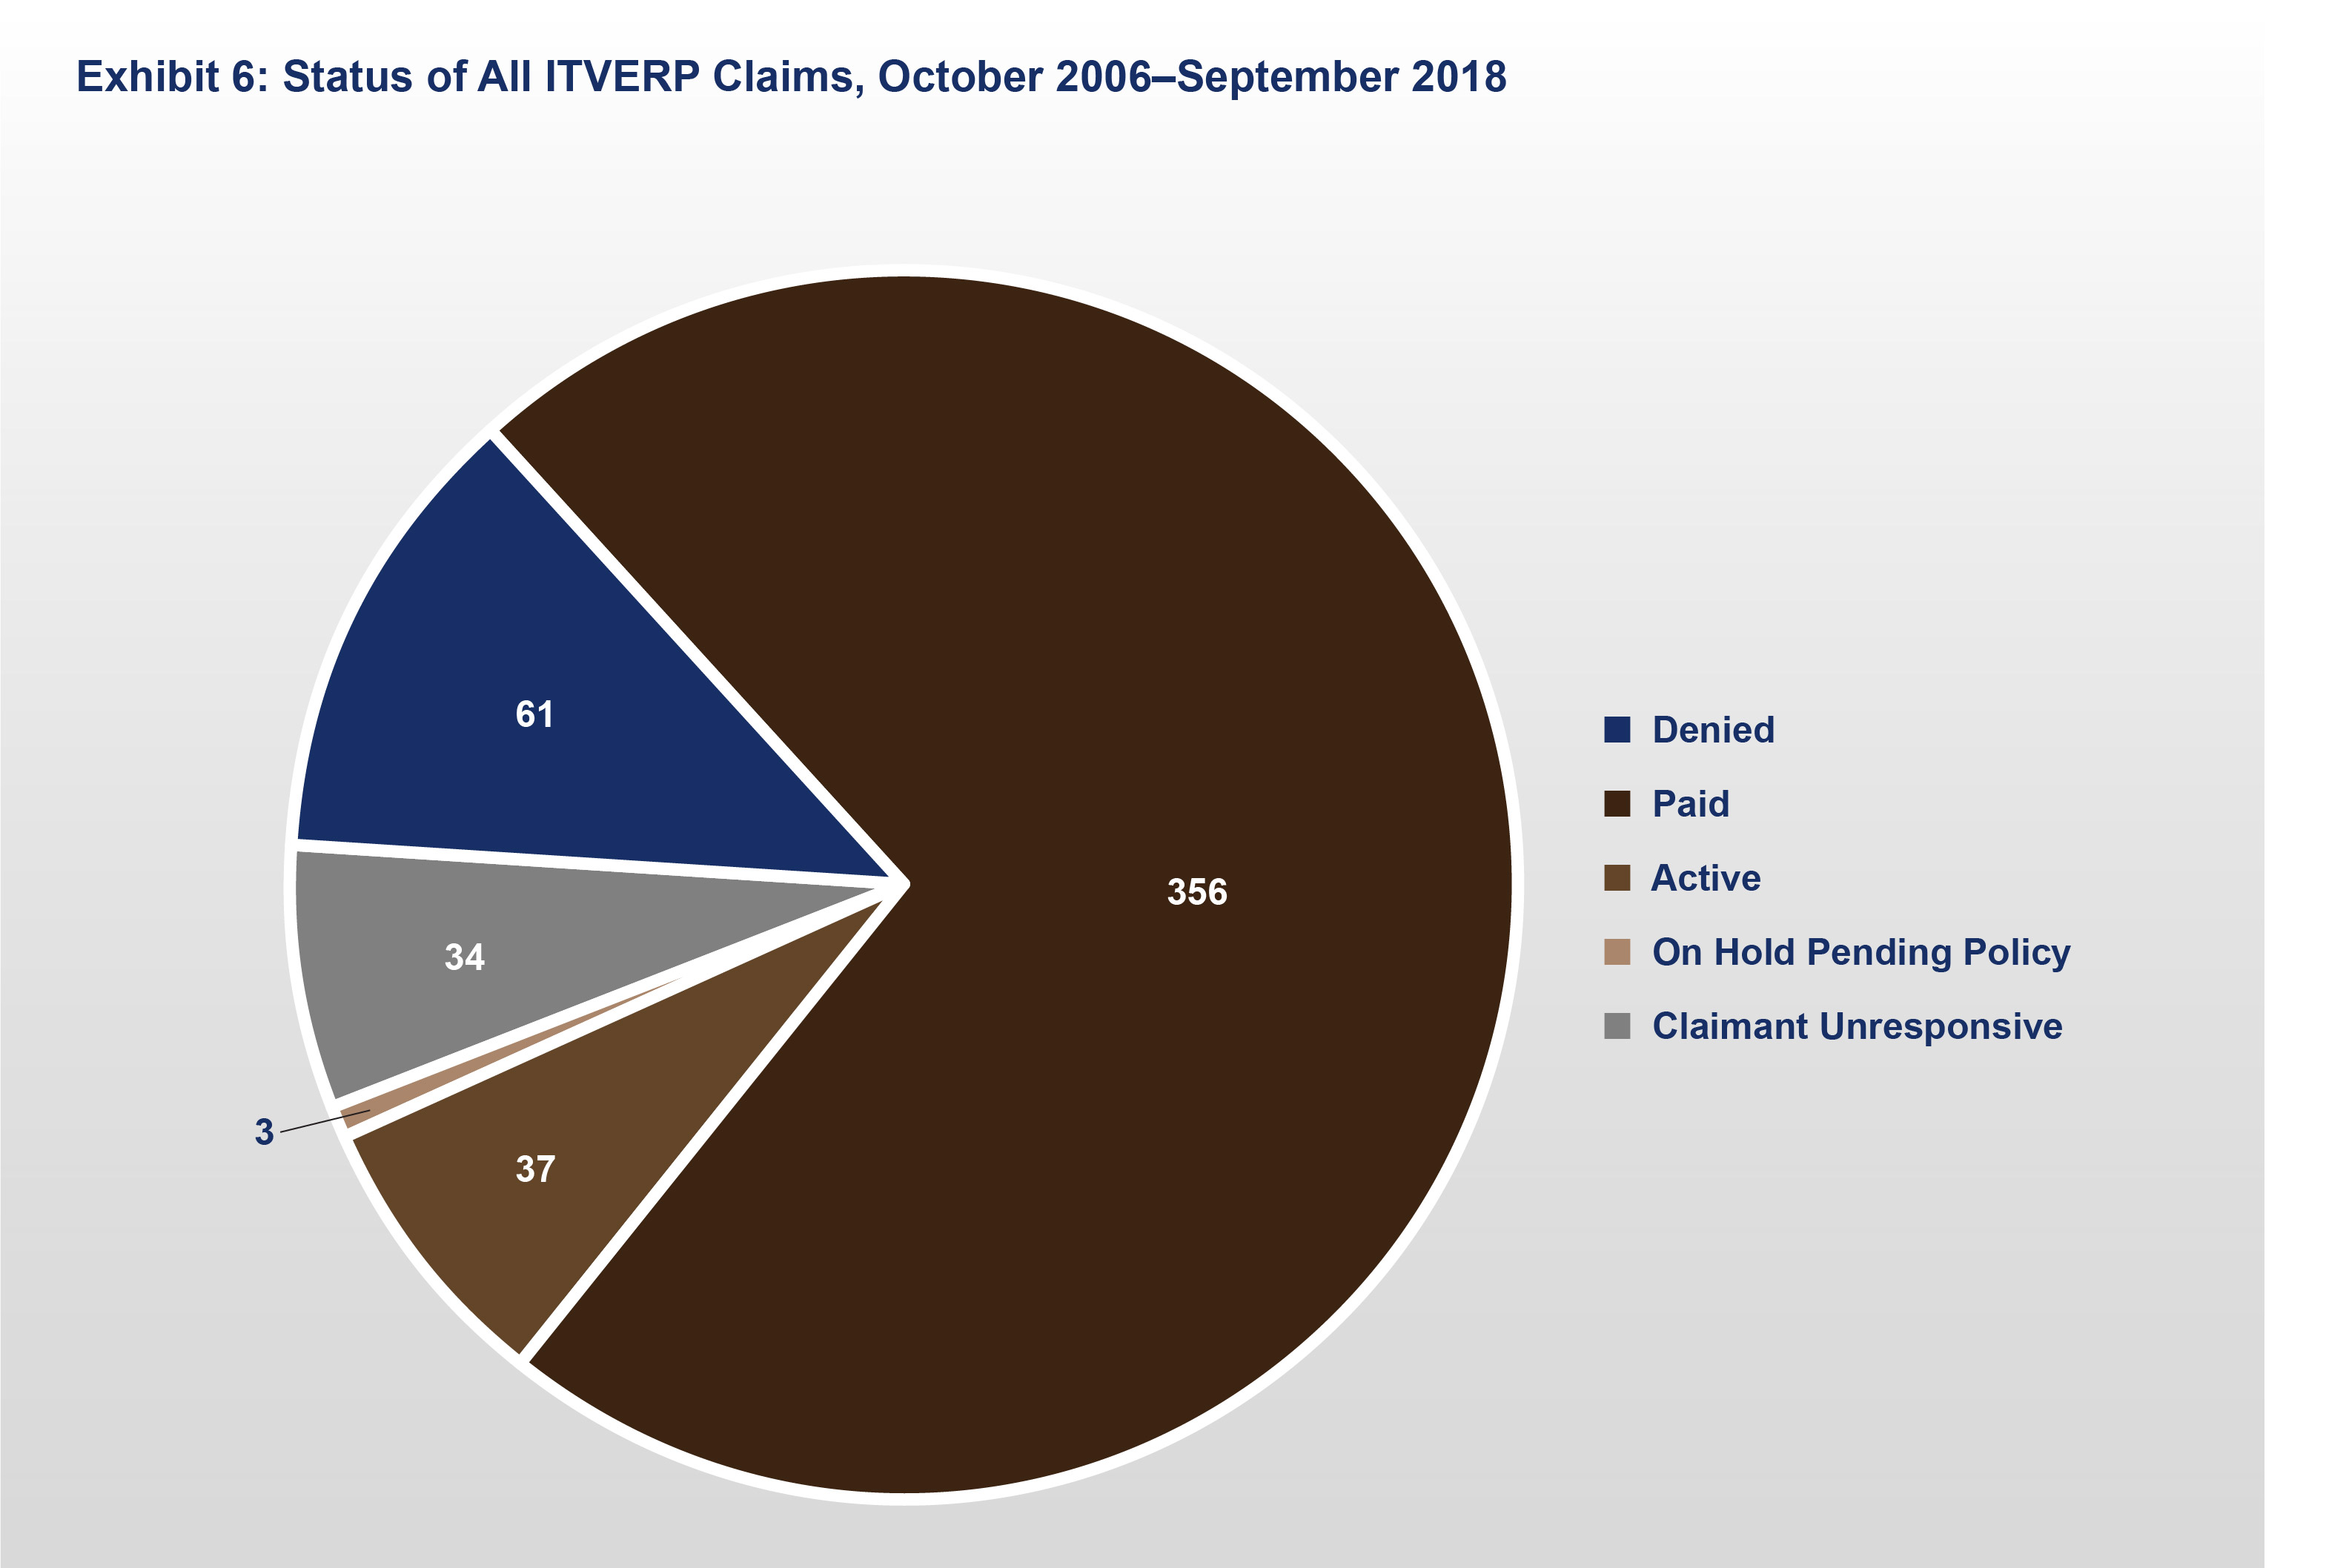 Exhibit 6: Status of All ITVERP Claims October 2006 - September 2018